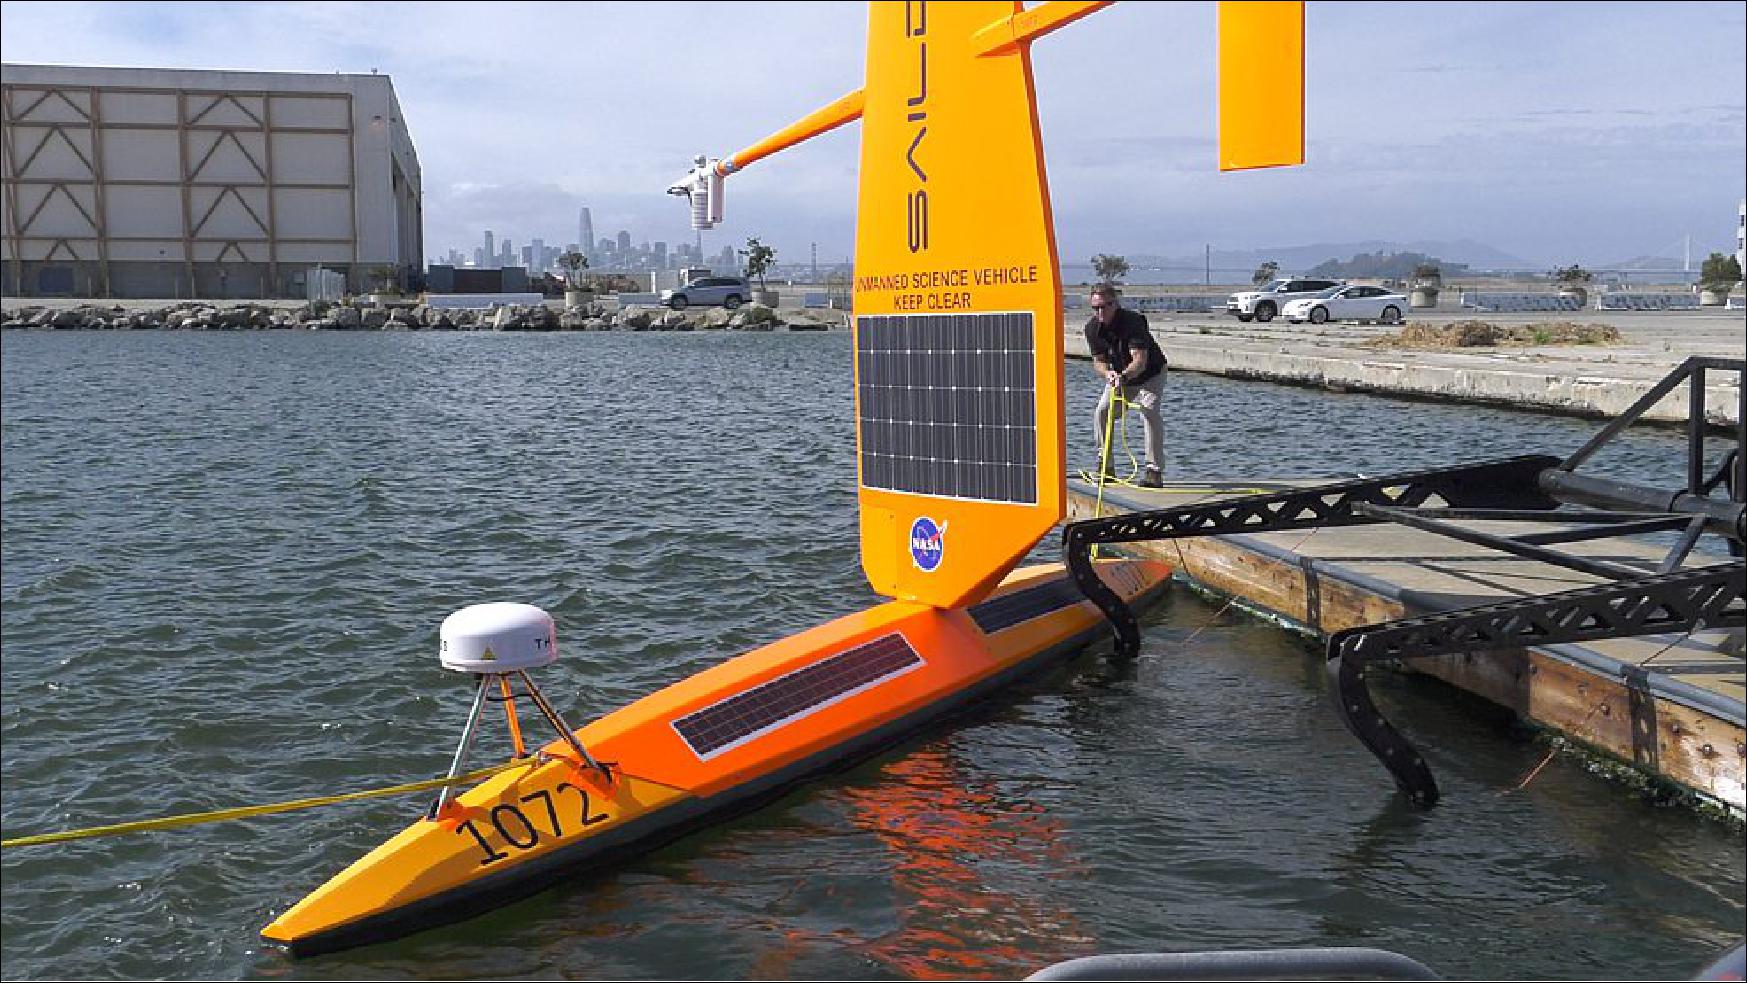 Figure 14: A type of autonomous marine robot called a Saildrone being deployed from Alameda, California (image credit: NASA, Jesse Carpenter)